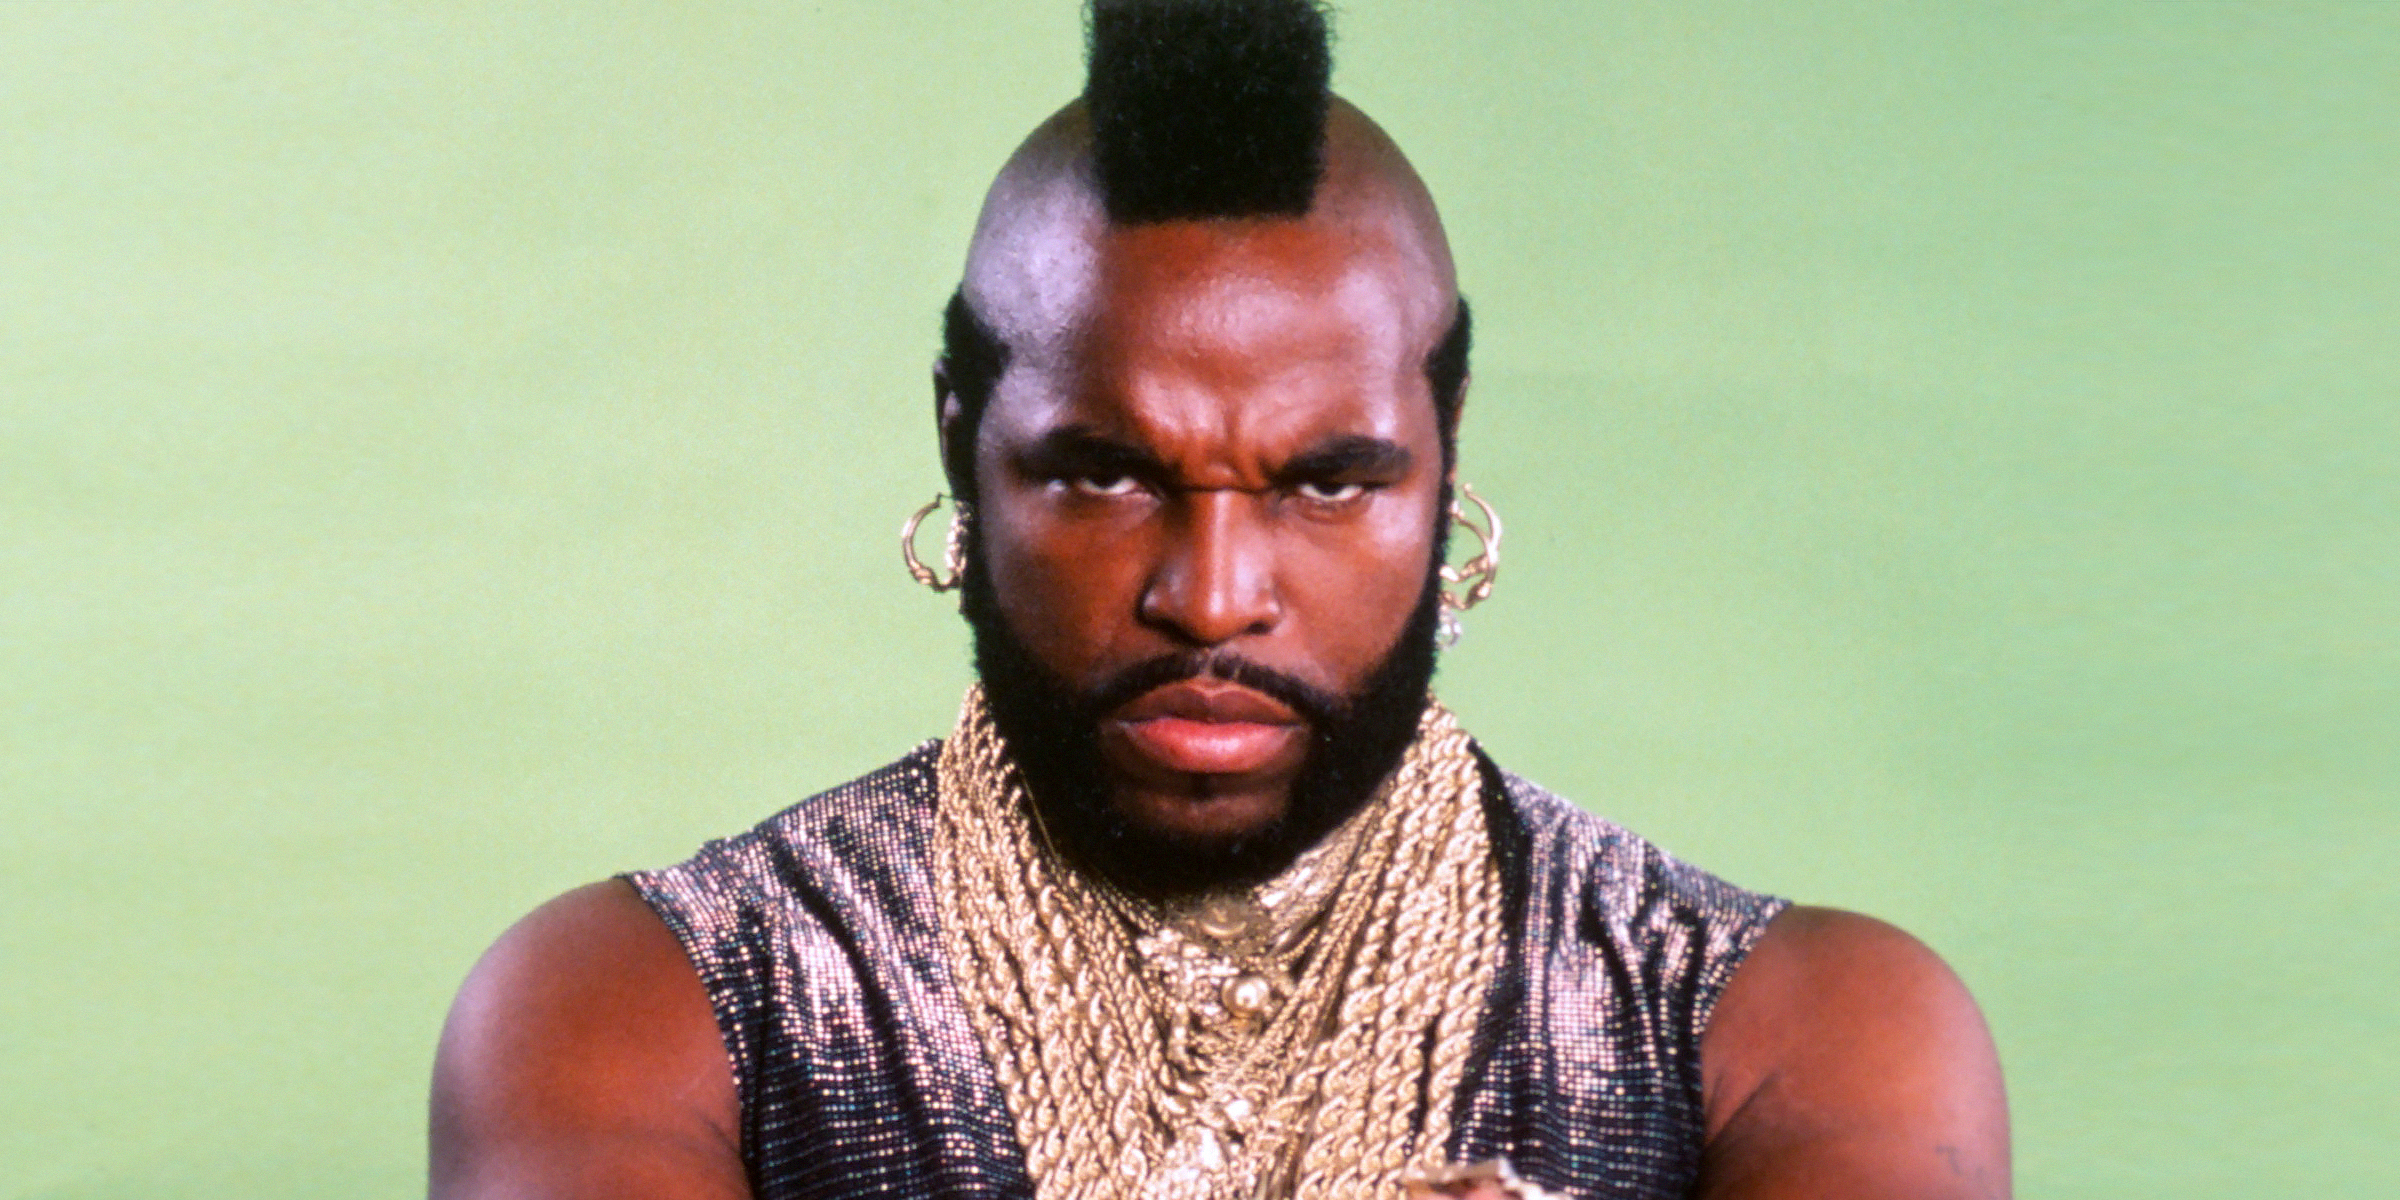 Mr T | Source: Getty Images